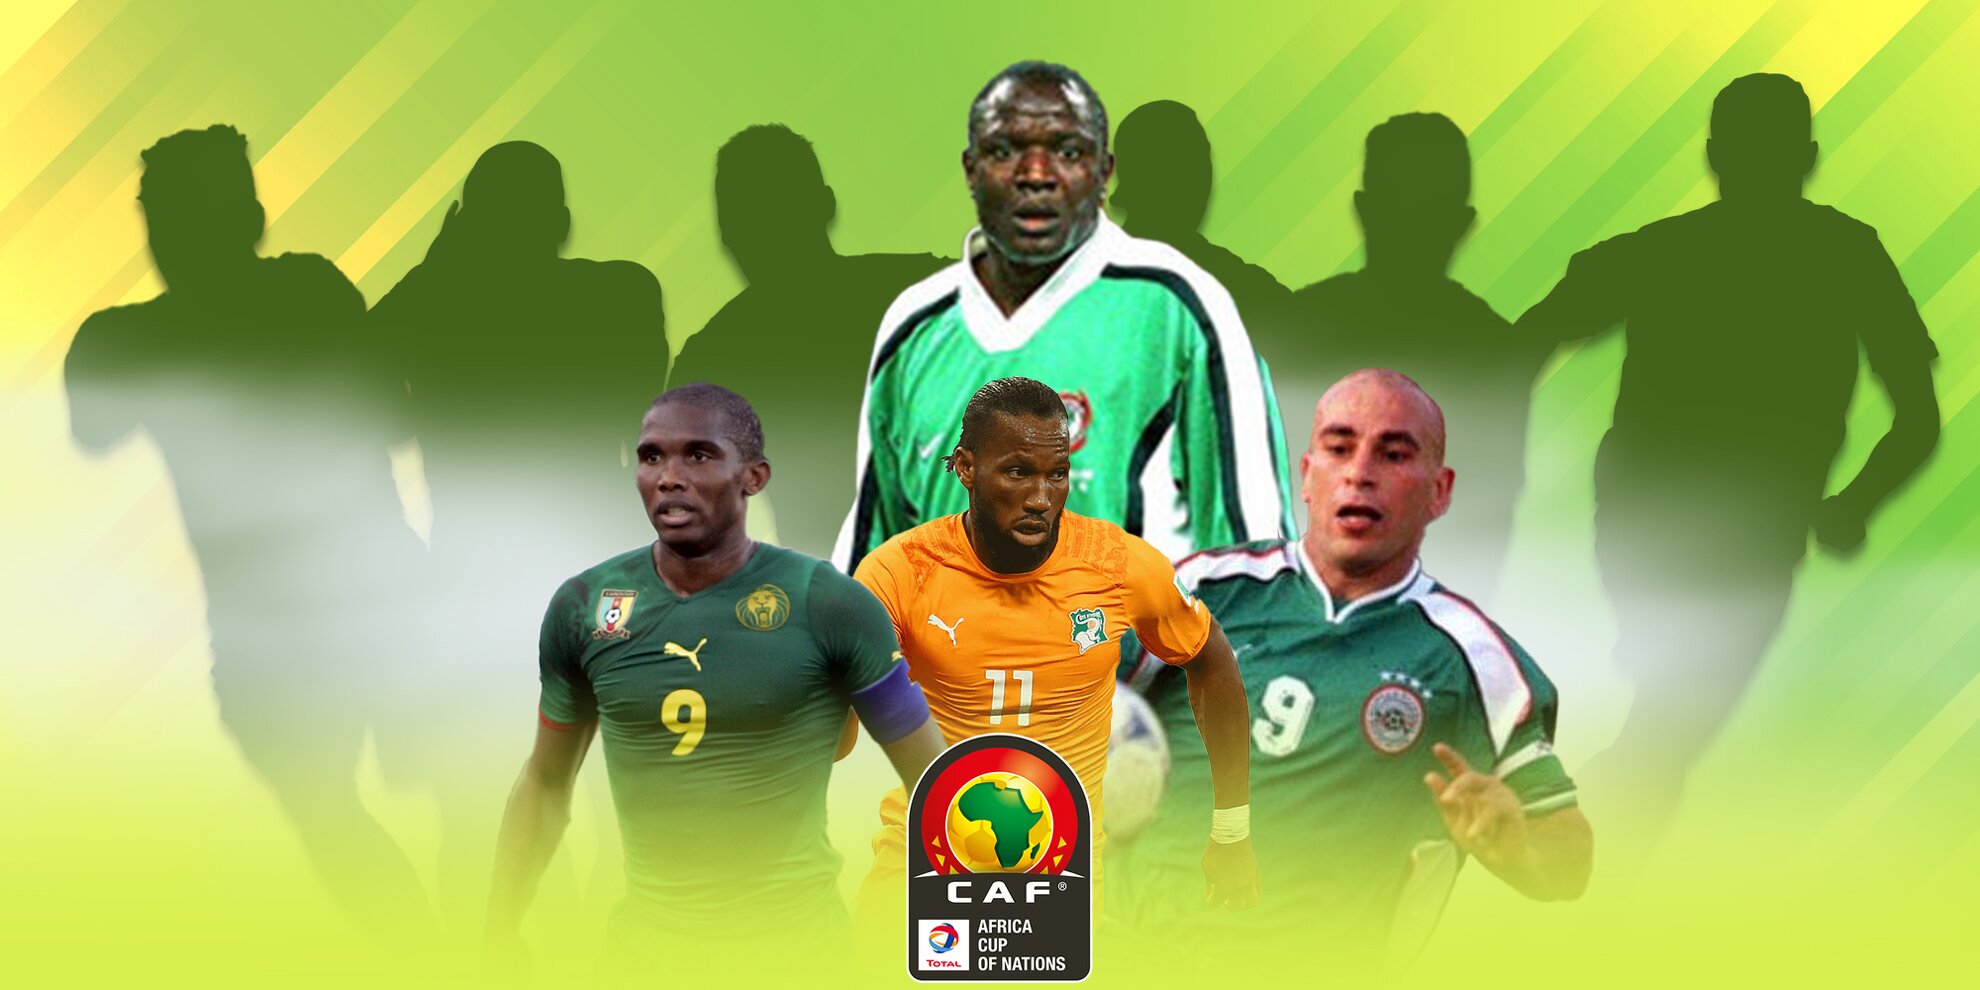 Africa of caf nations cup African Cup